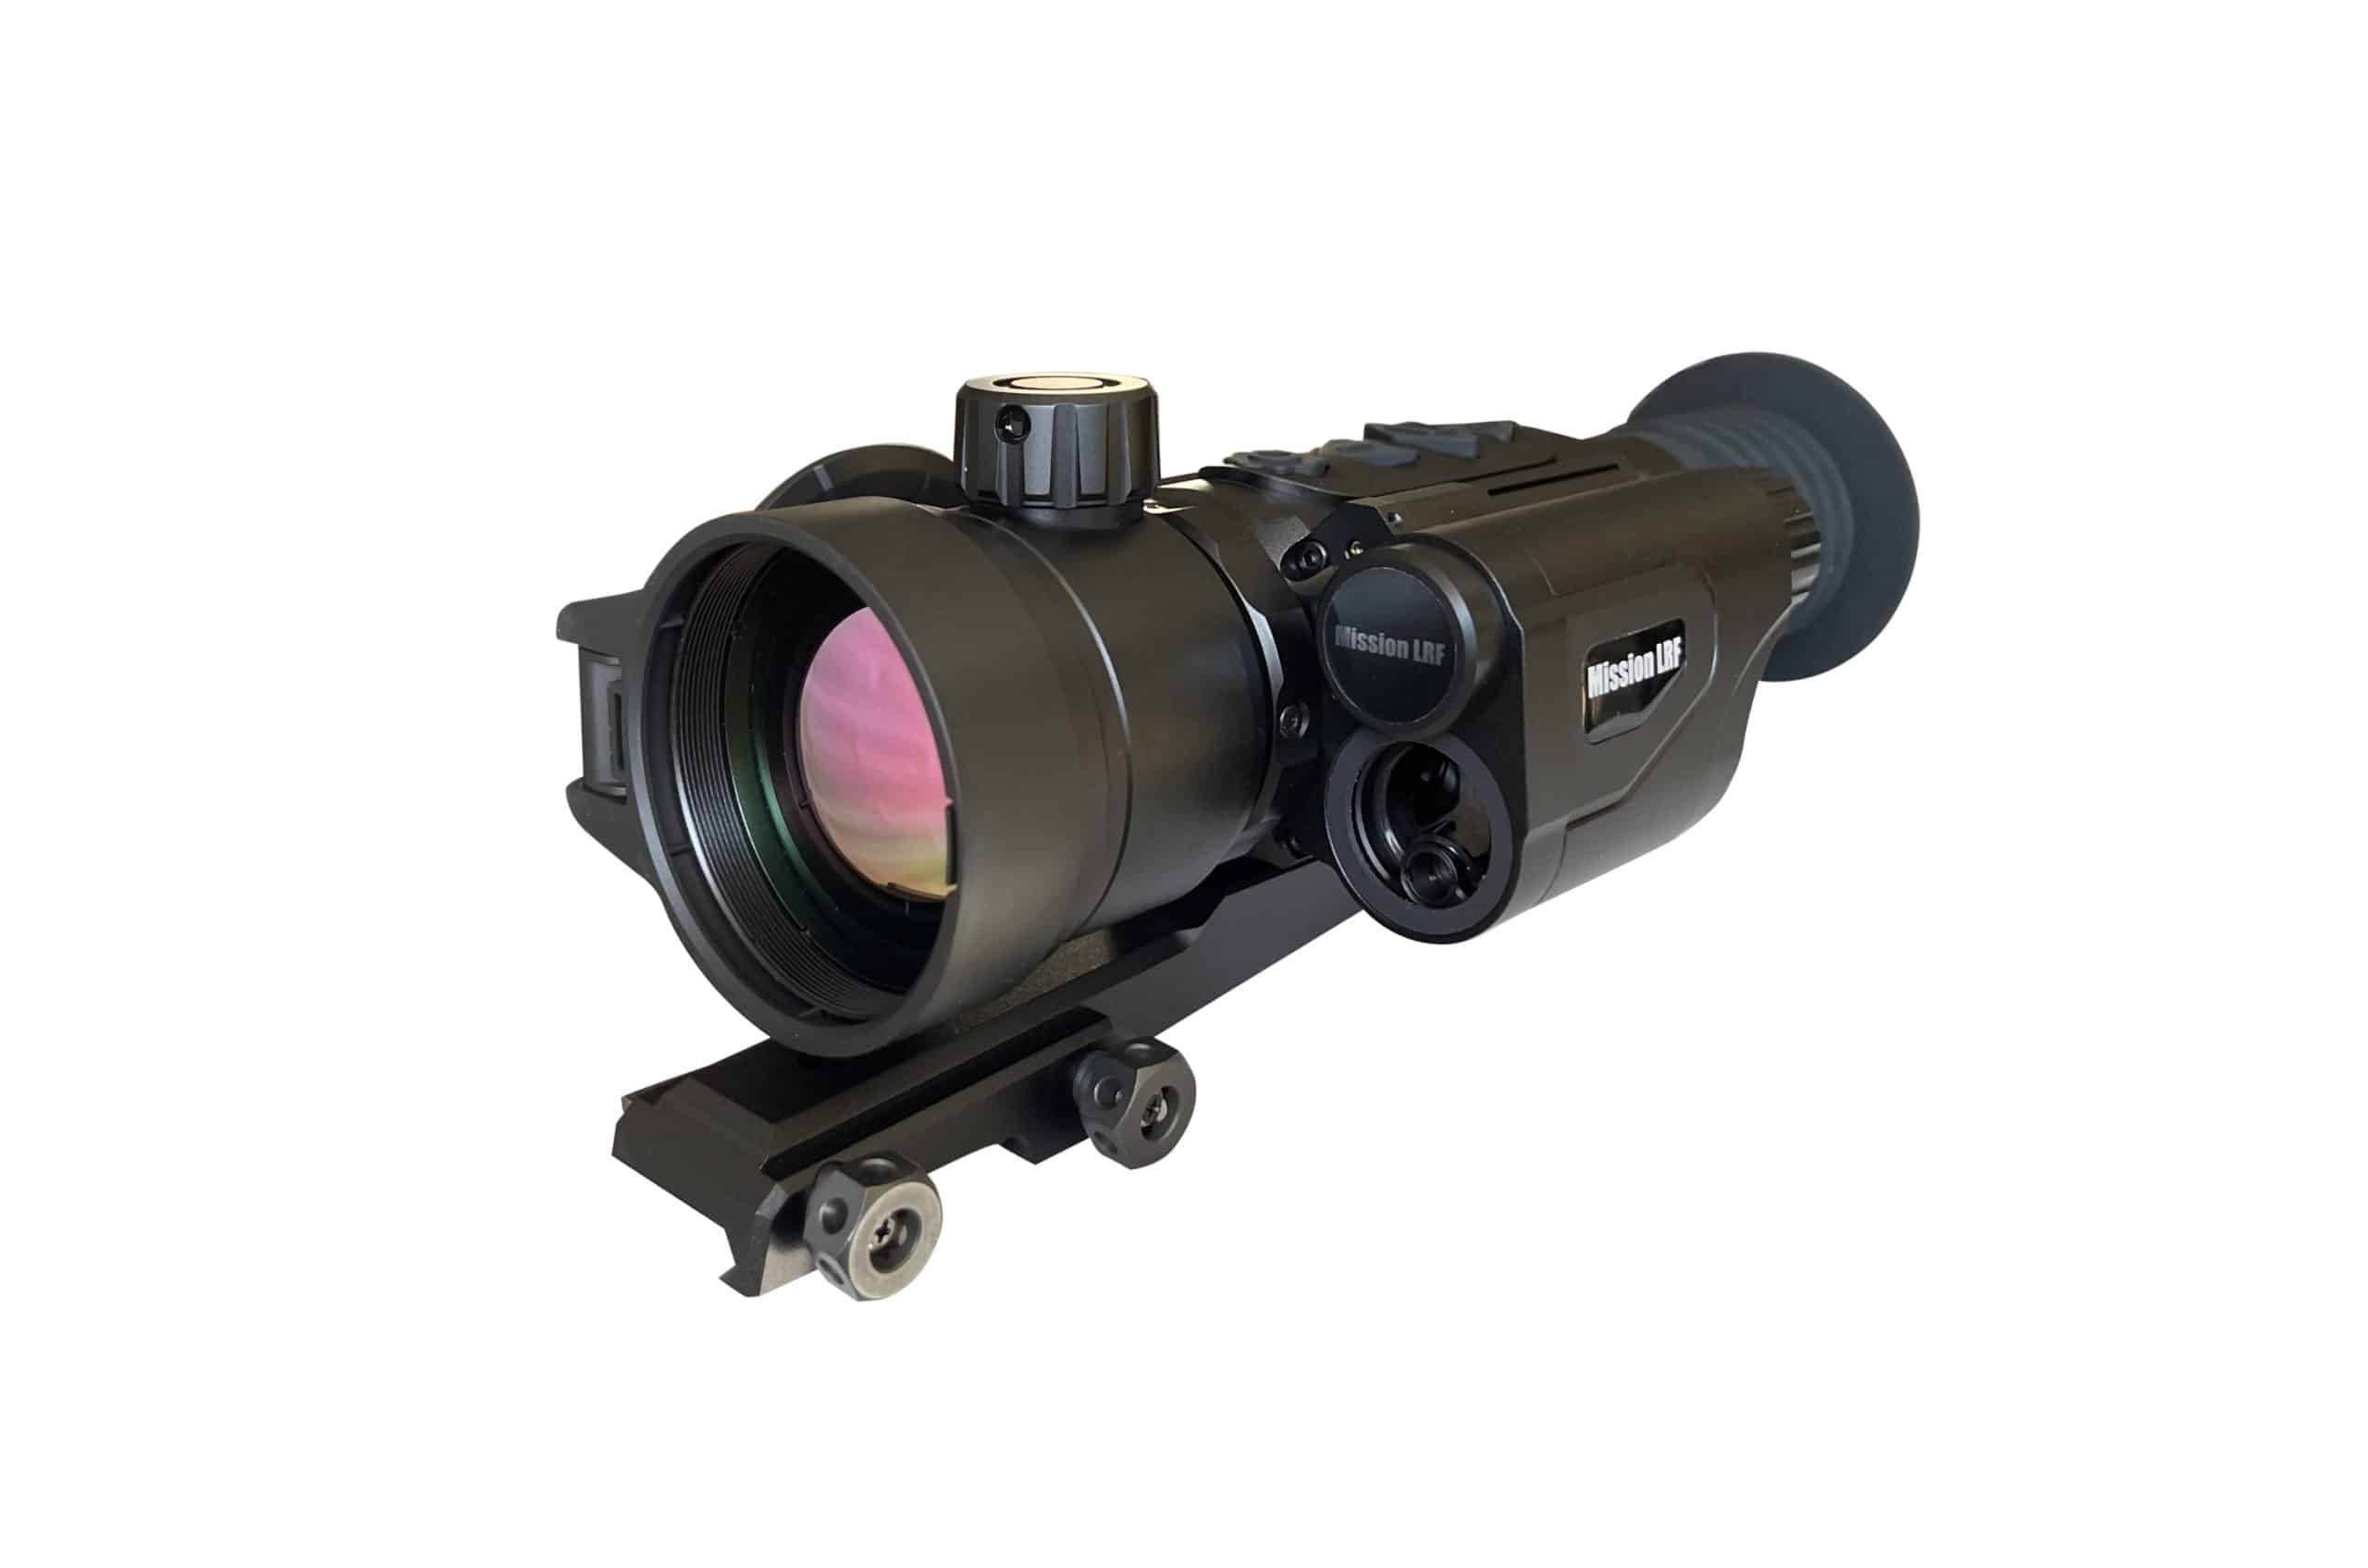 Powerful Military Optic Thermal Night Vision Scope for Day and